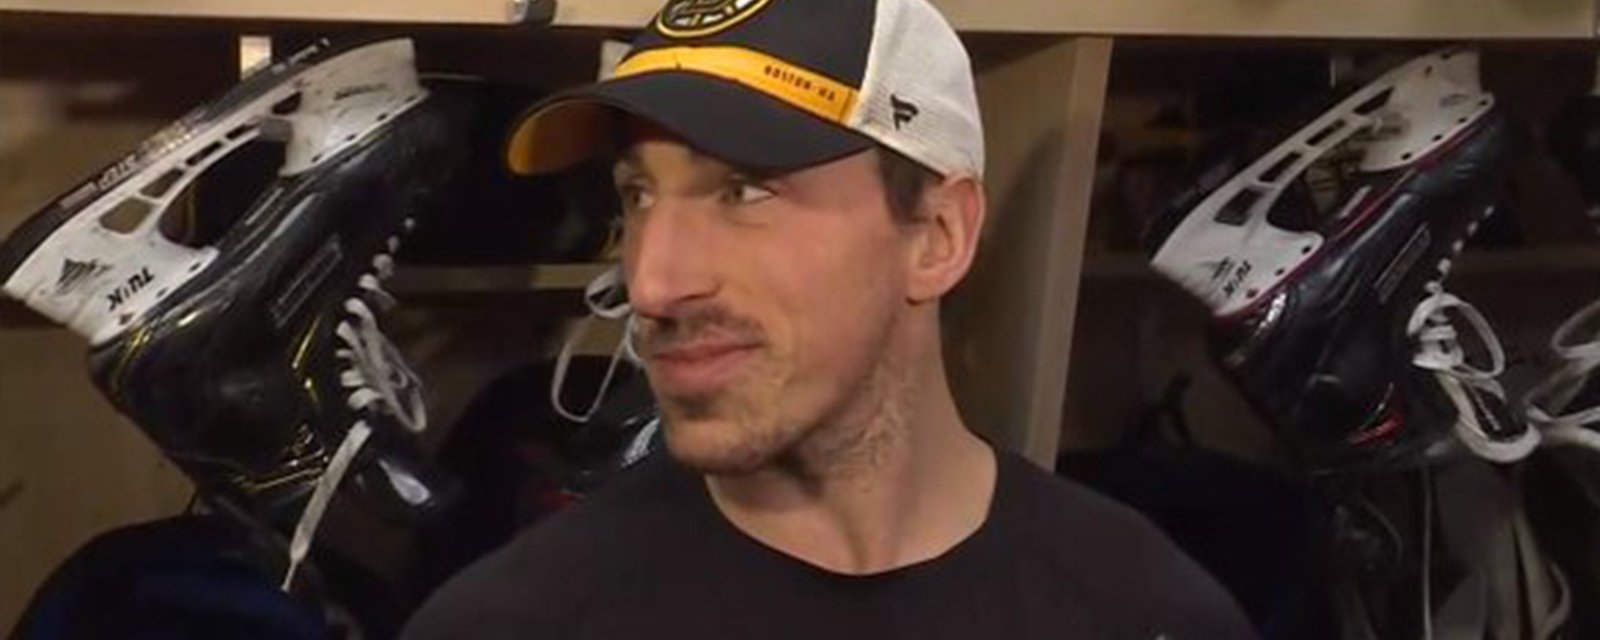 Brad Marchand says he's “too tired” to play the role of NHL’s biggest pest anymore